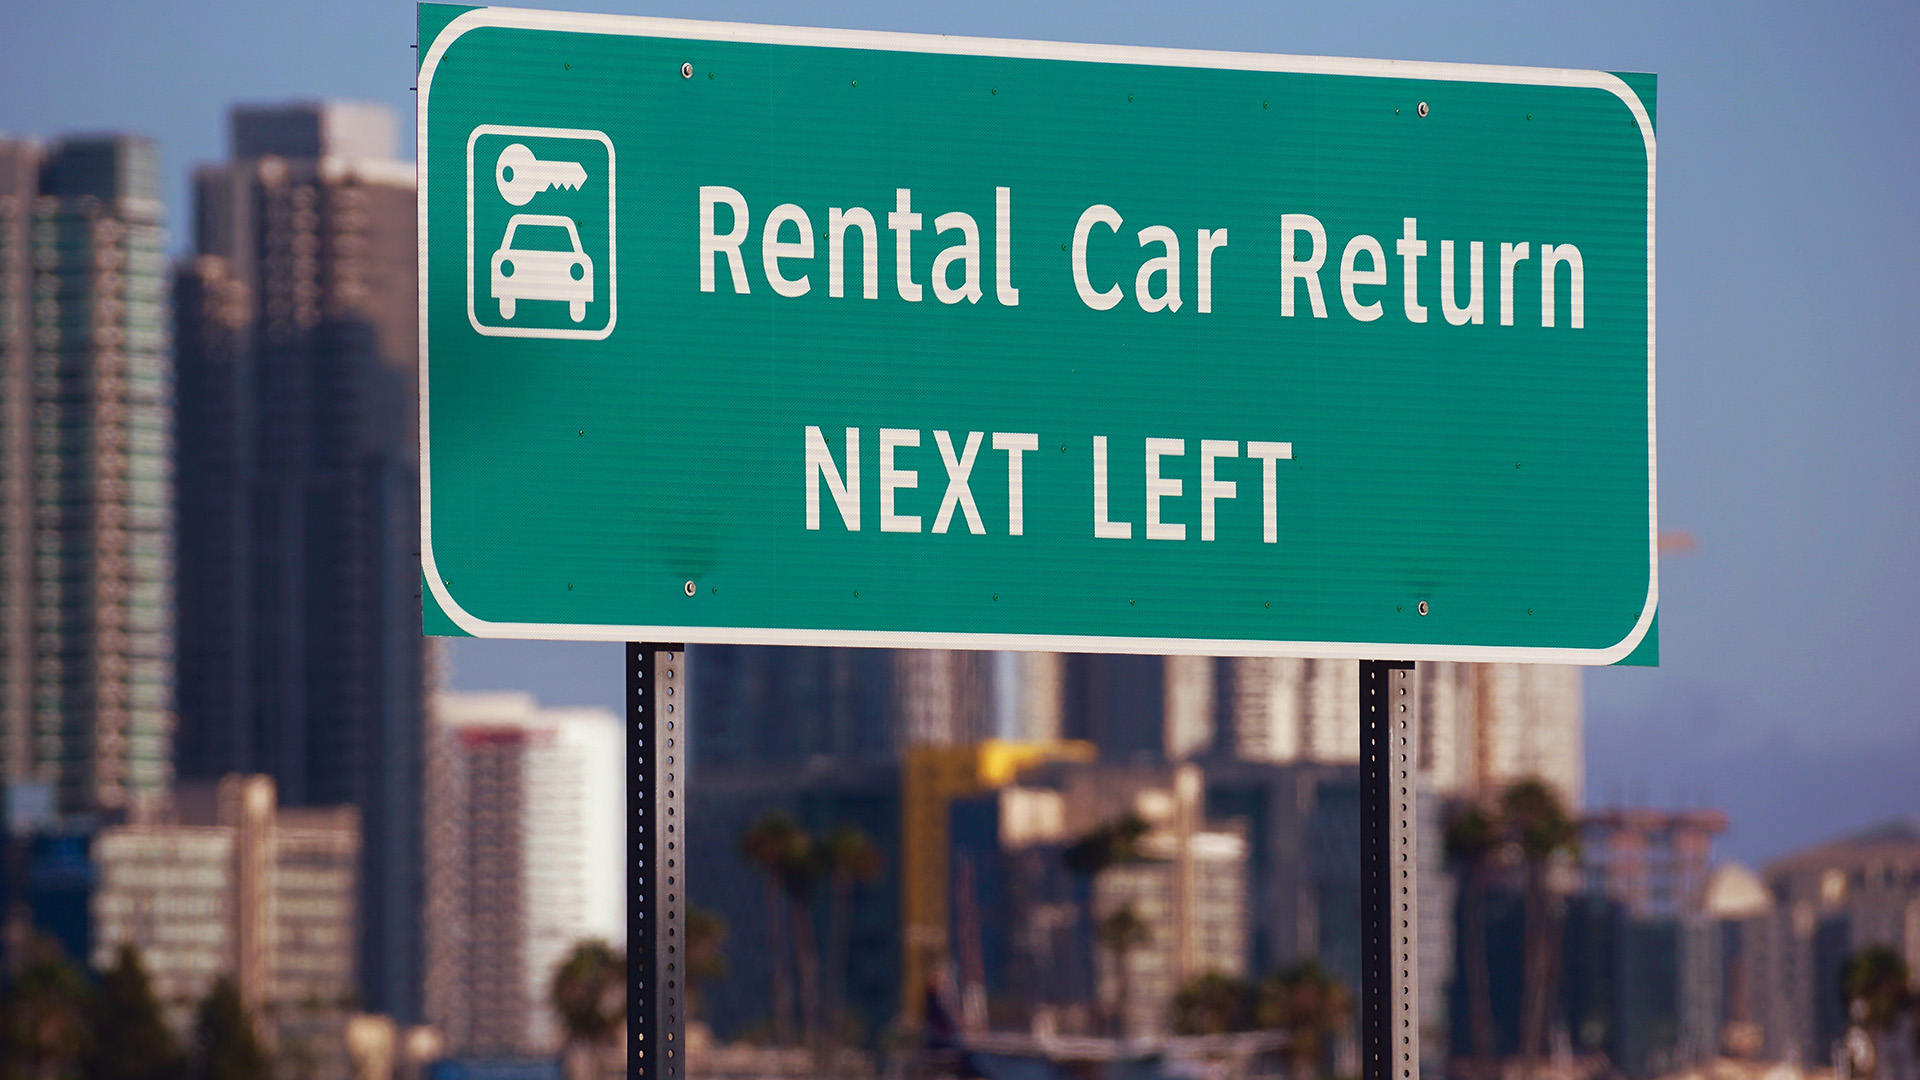 Who Is Liable in Florida If a Rental Car Driver Hits You? 6 St. Patrick's Day South Florida Injury Law Firm